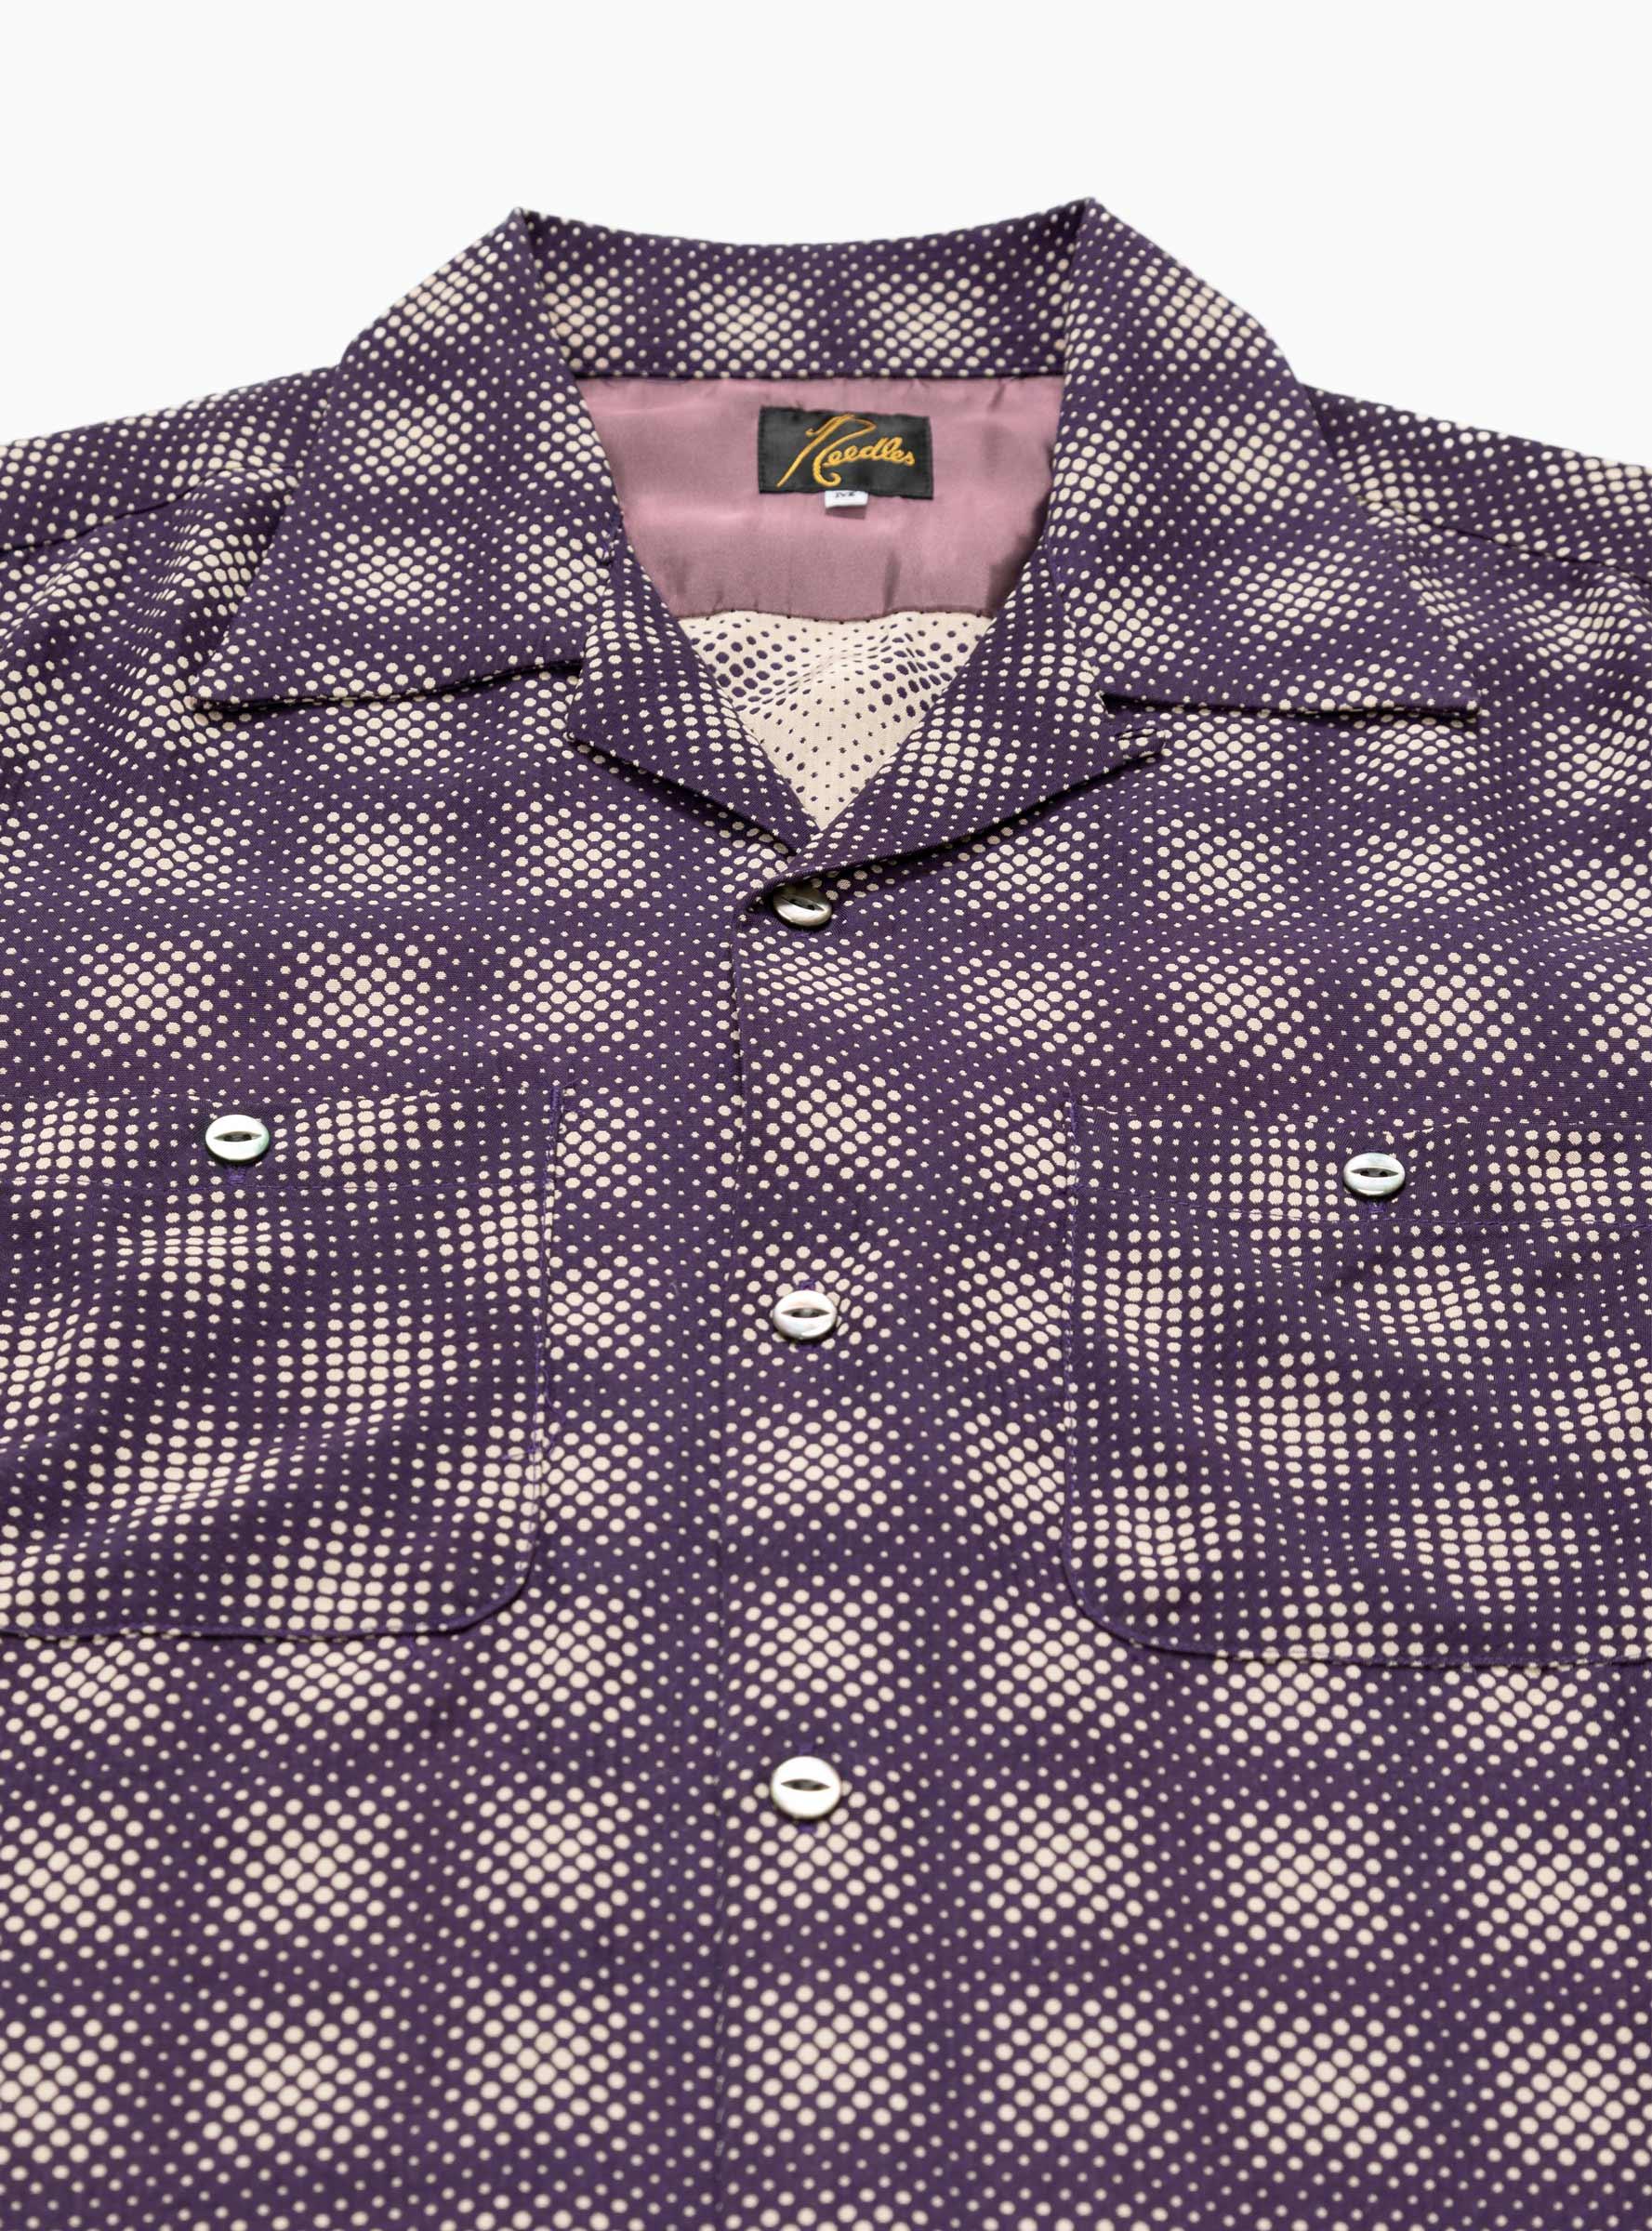 Needles C.o.b. Short Sleeve Classic Shirt Dot Ombre in Purple for 